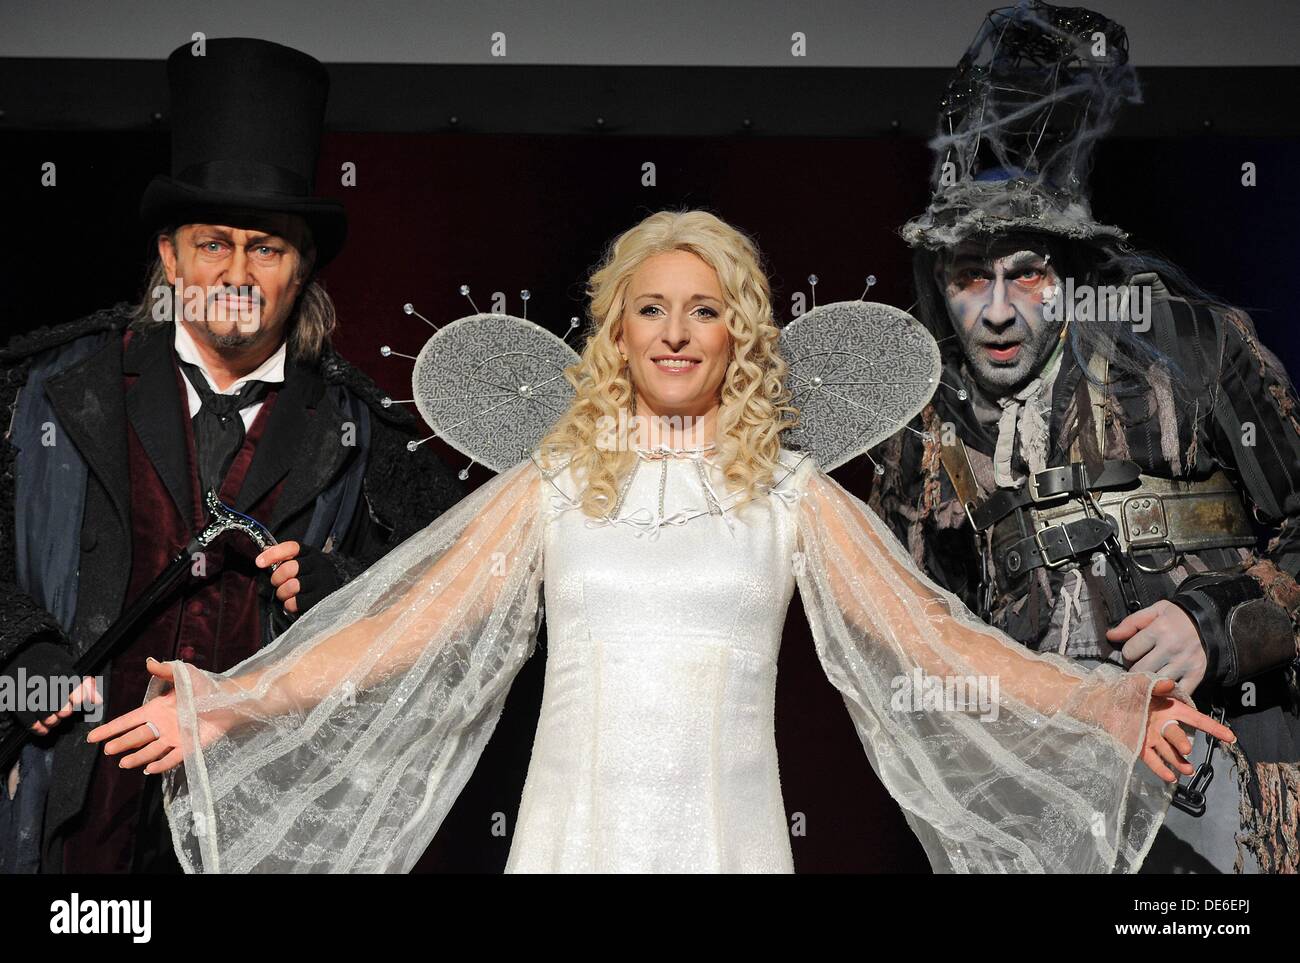 Singer Kristian Vetter (L) Stefanie Hertel (C) and Klaus Seiffert (R) pose  during the presentation of the musical 'Vom Geist der Weihnacht' (based on  Charles Dickens' A Christmas Carol) in Duesseldorf, Germany,